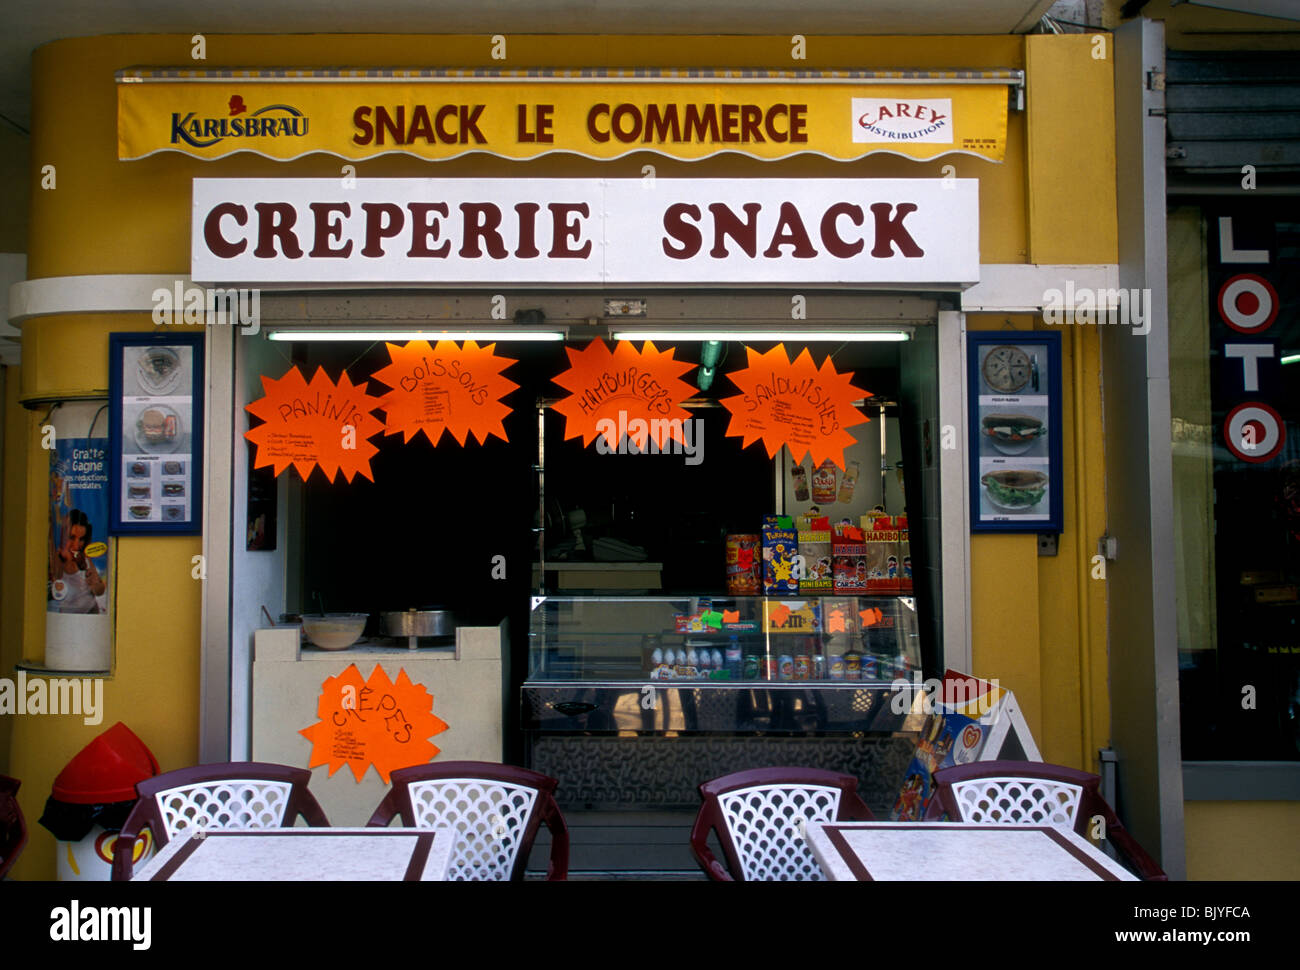 Creperie Snack, creperie, crepe, crepes, sign, menu, French restaurant, French food and drink, French food, Orange, France Europe Stock Photo